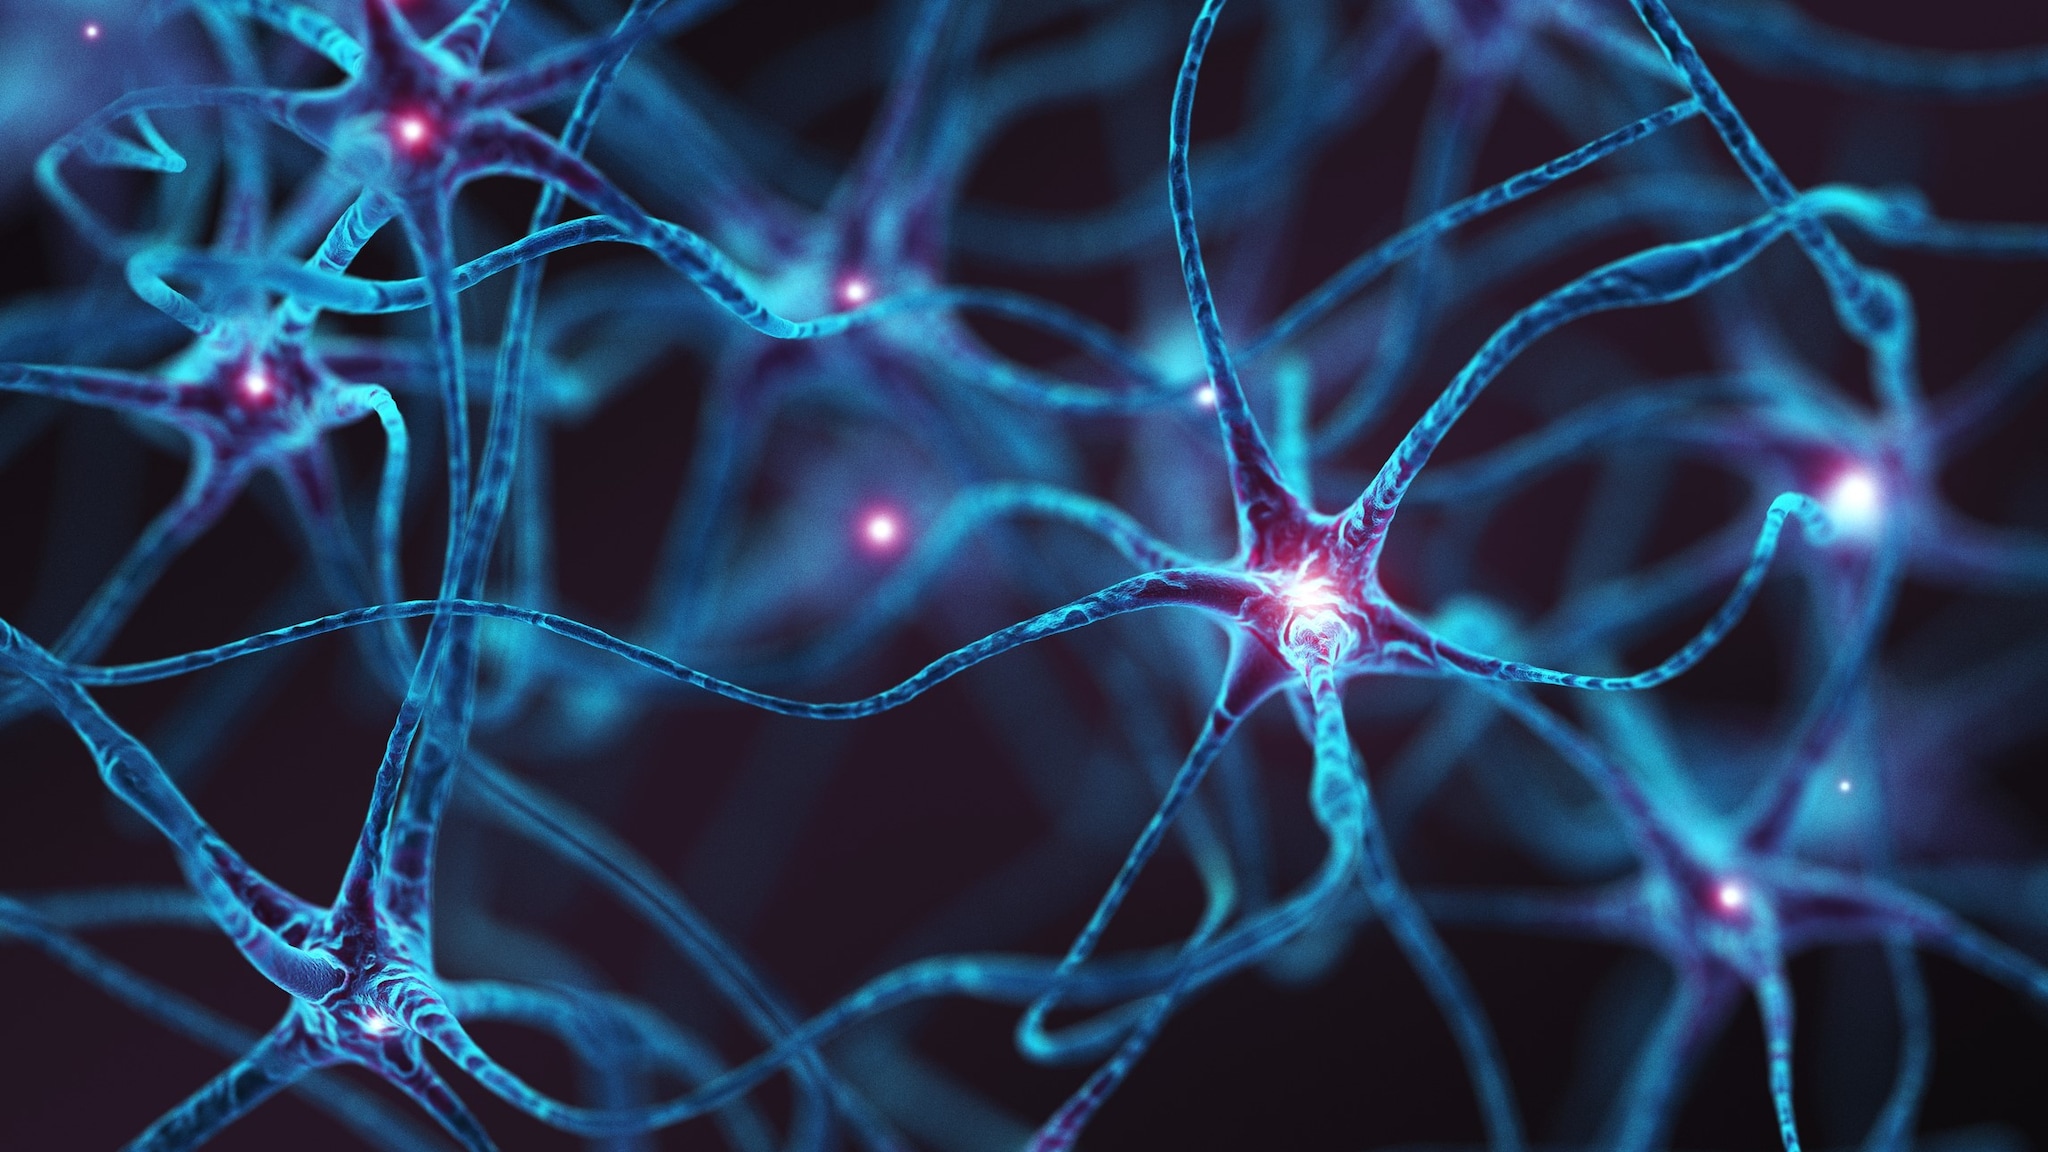 Blue colored nerve cells interconnected firing red signals to each other.